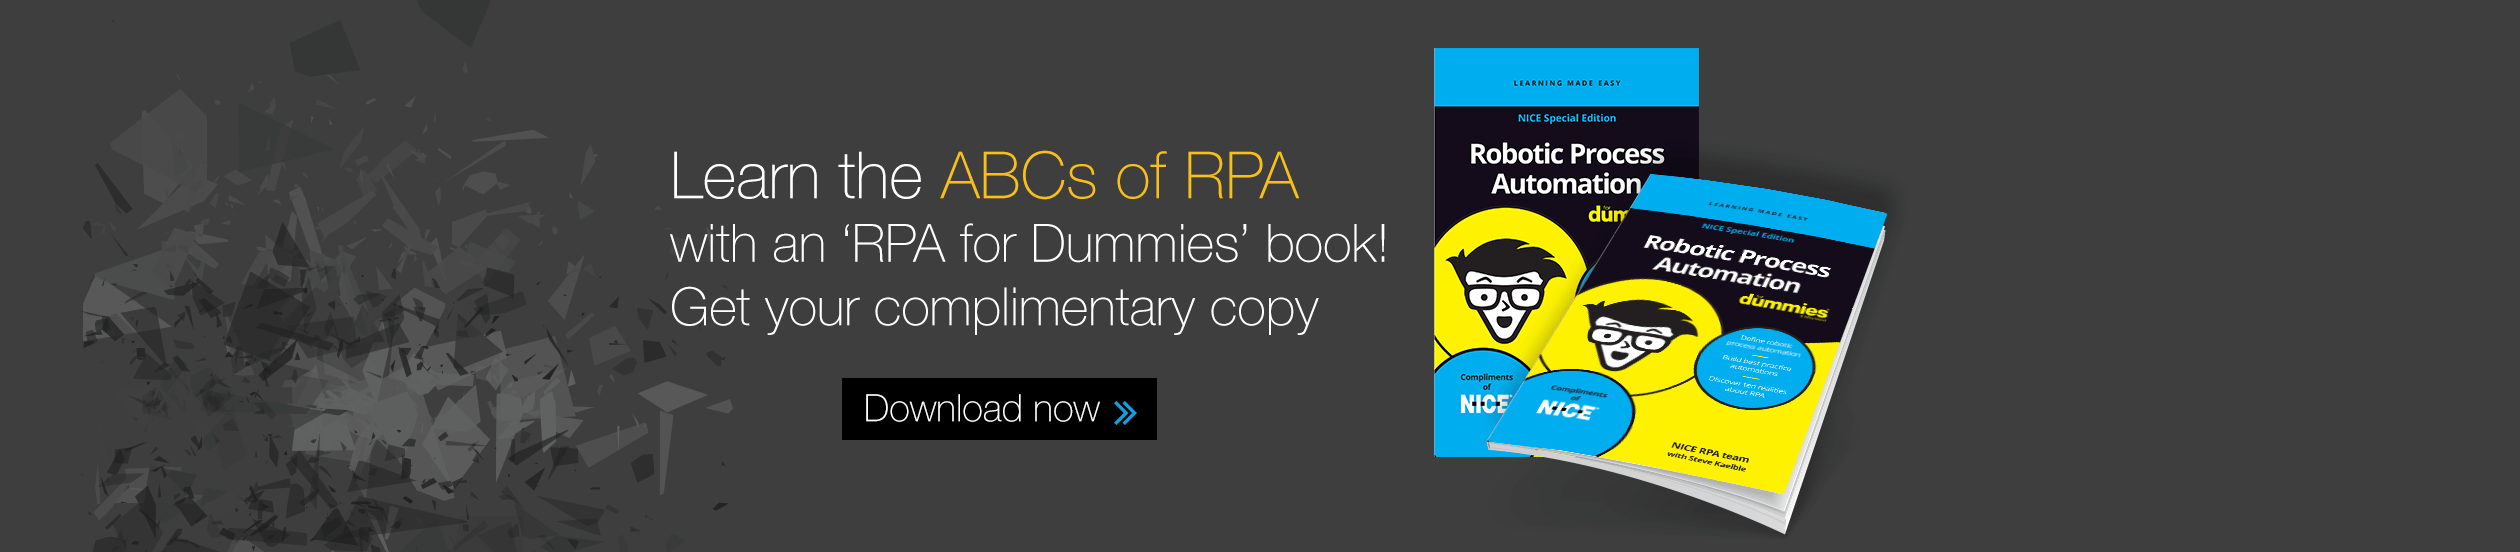 Learn the ABCs of RPA with an 'RPA'